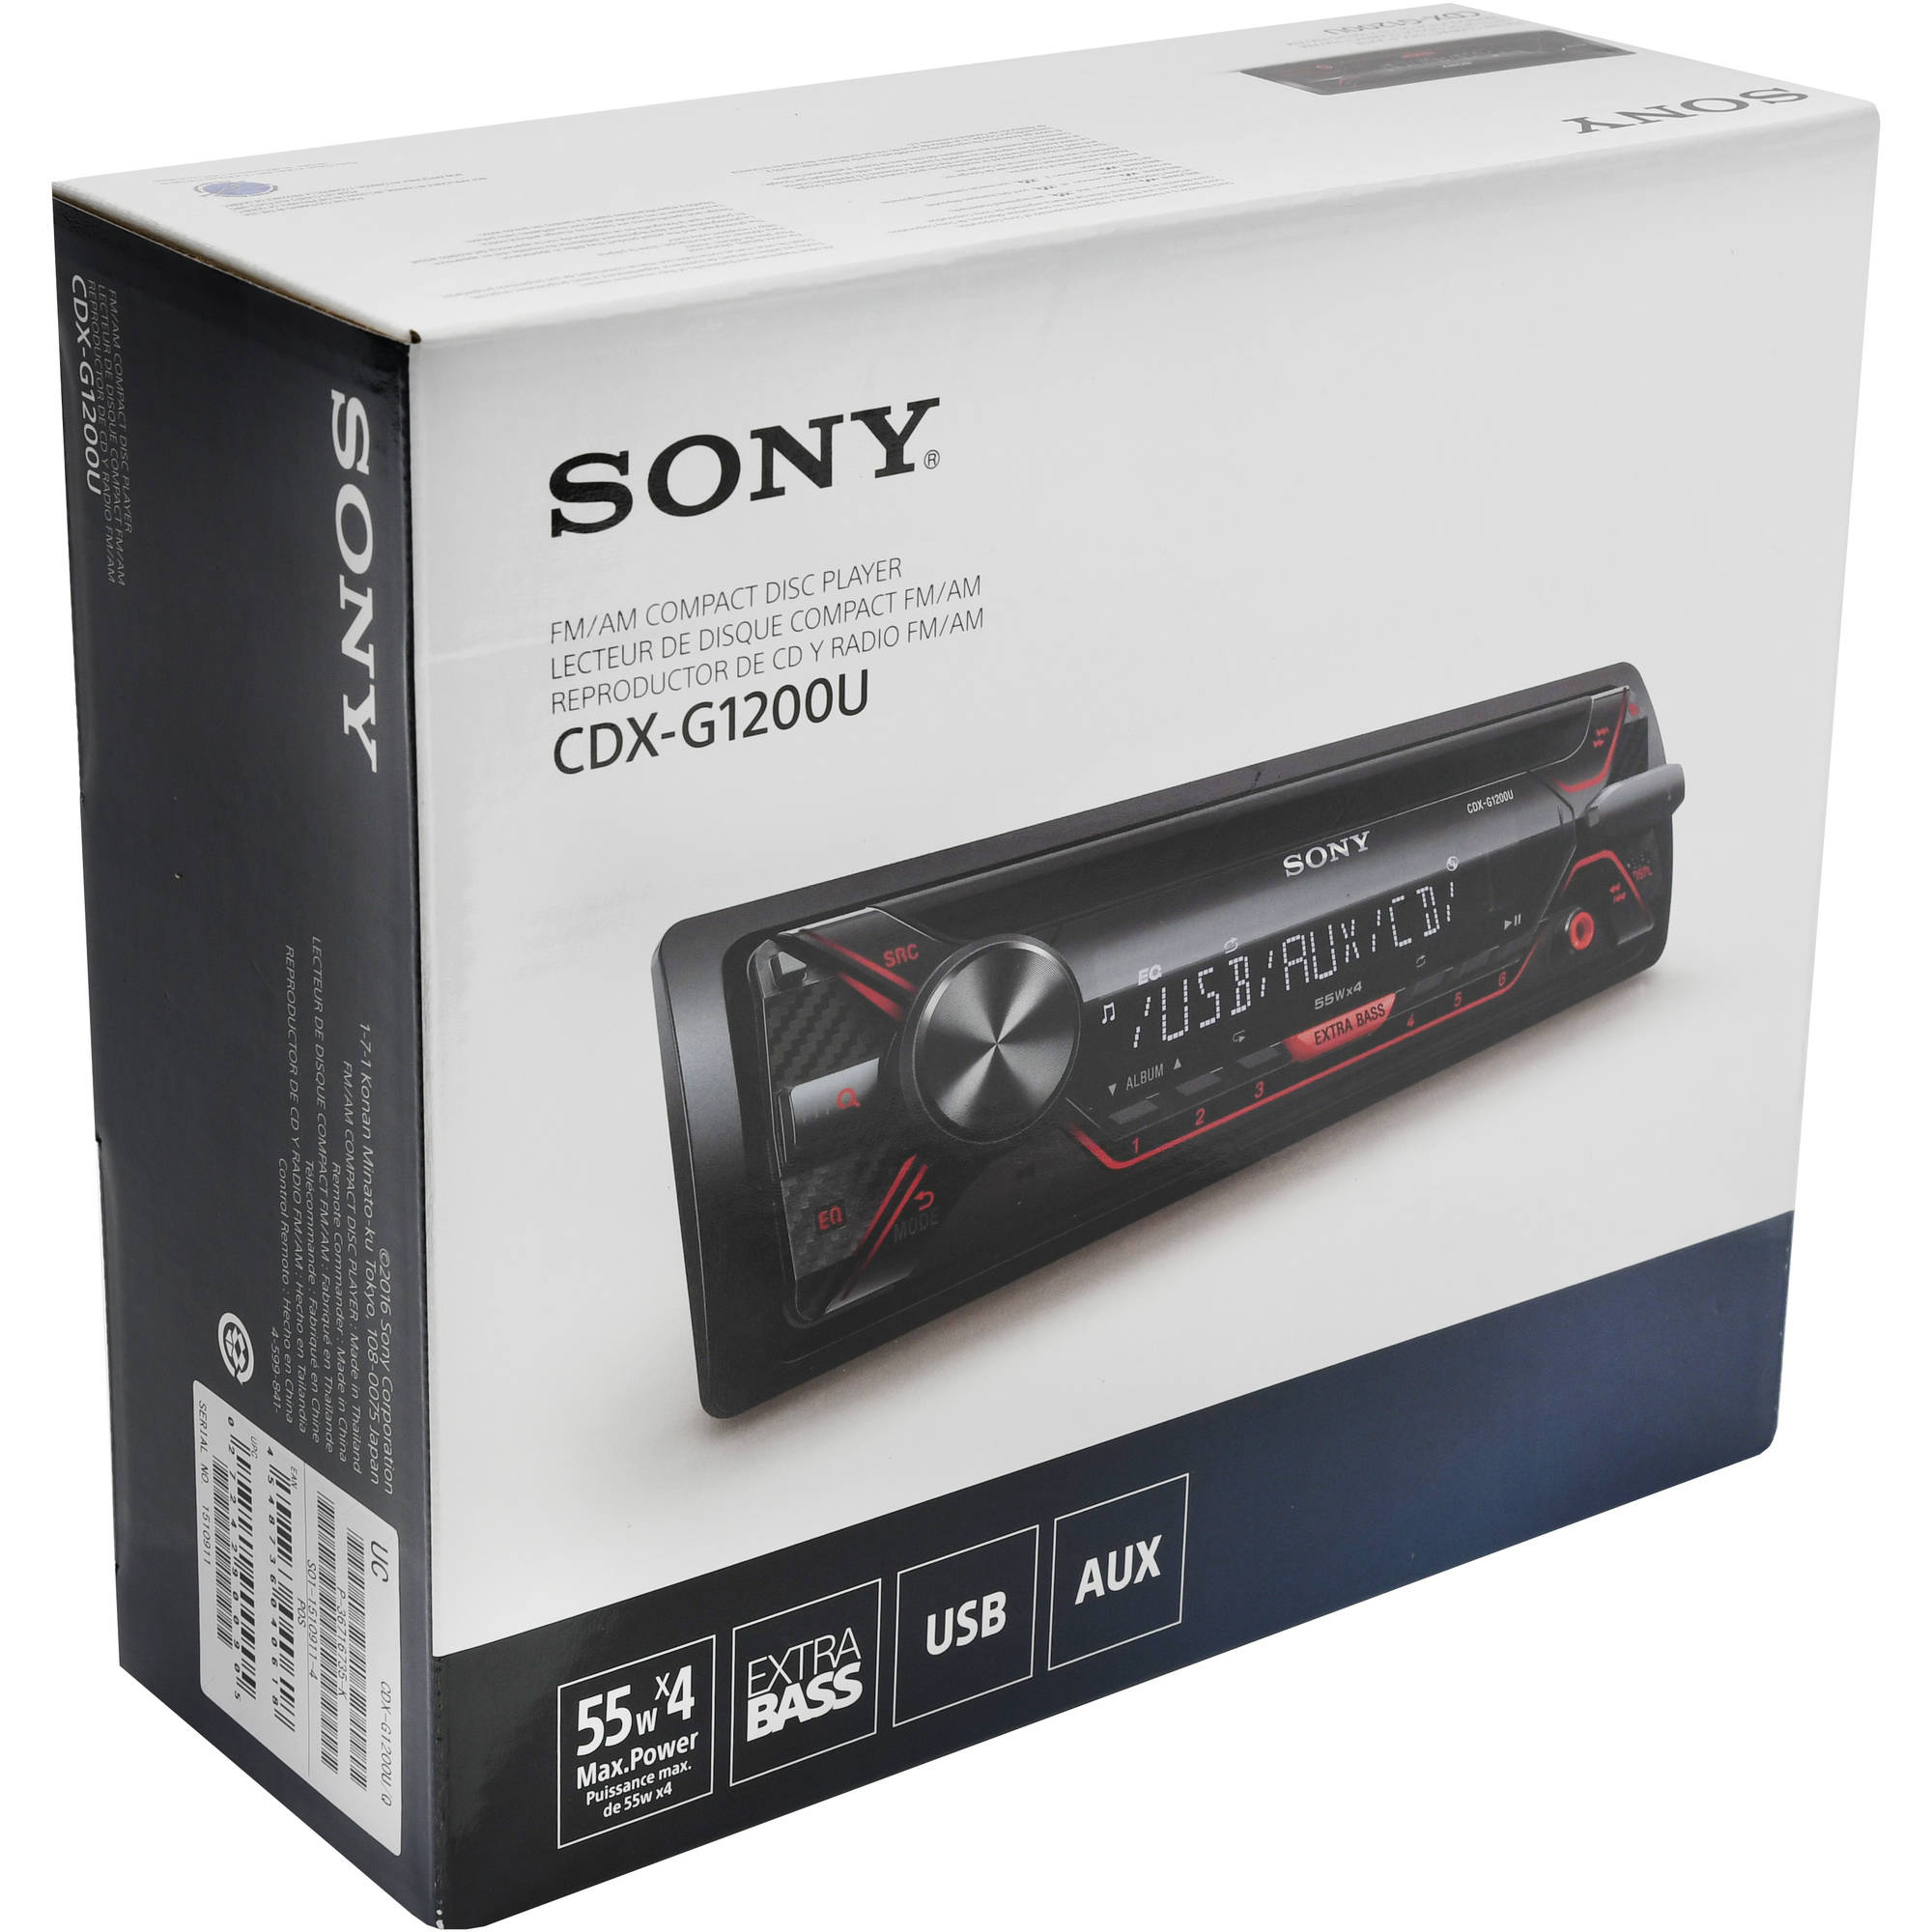 Restored Sony CDX-G1200U 55W CD Receiver with Enhanced Smartphone Connectivity (Refurbished) - image 1 of 5